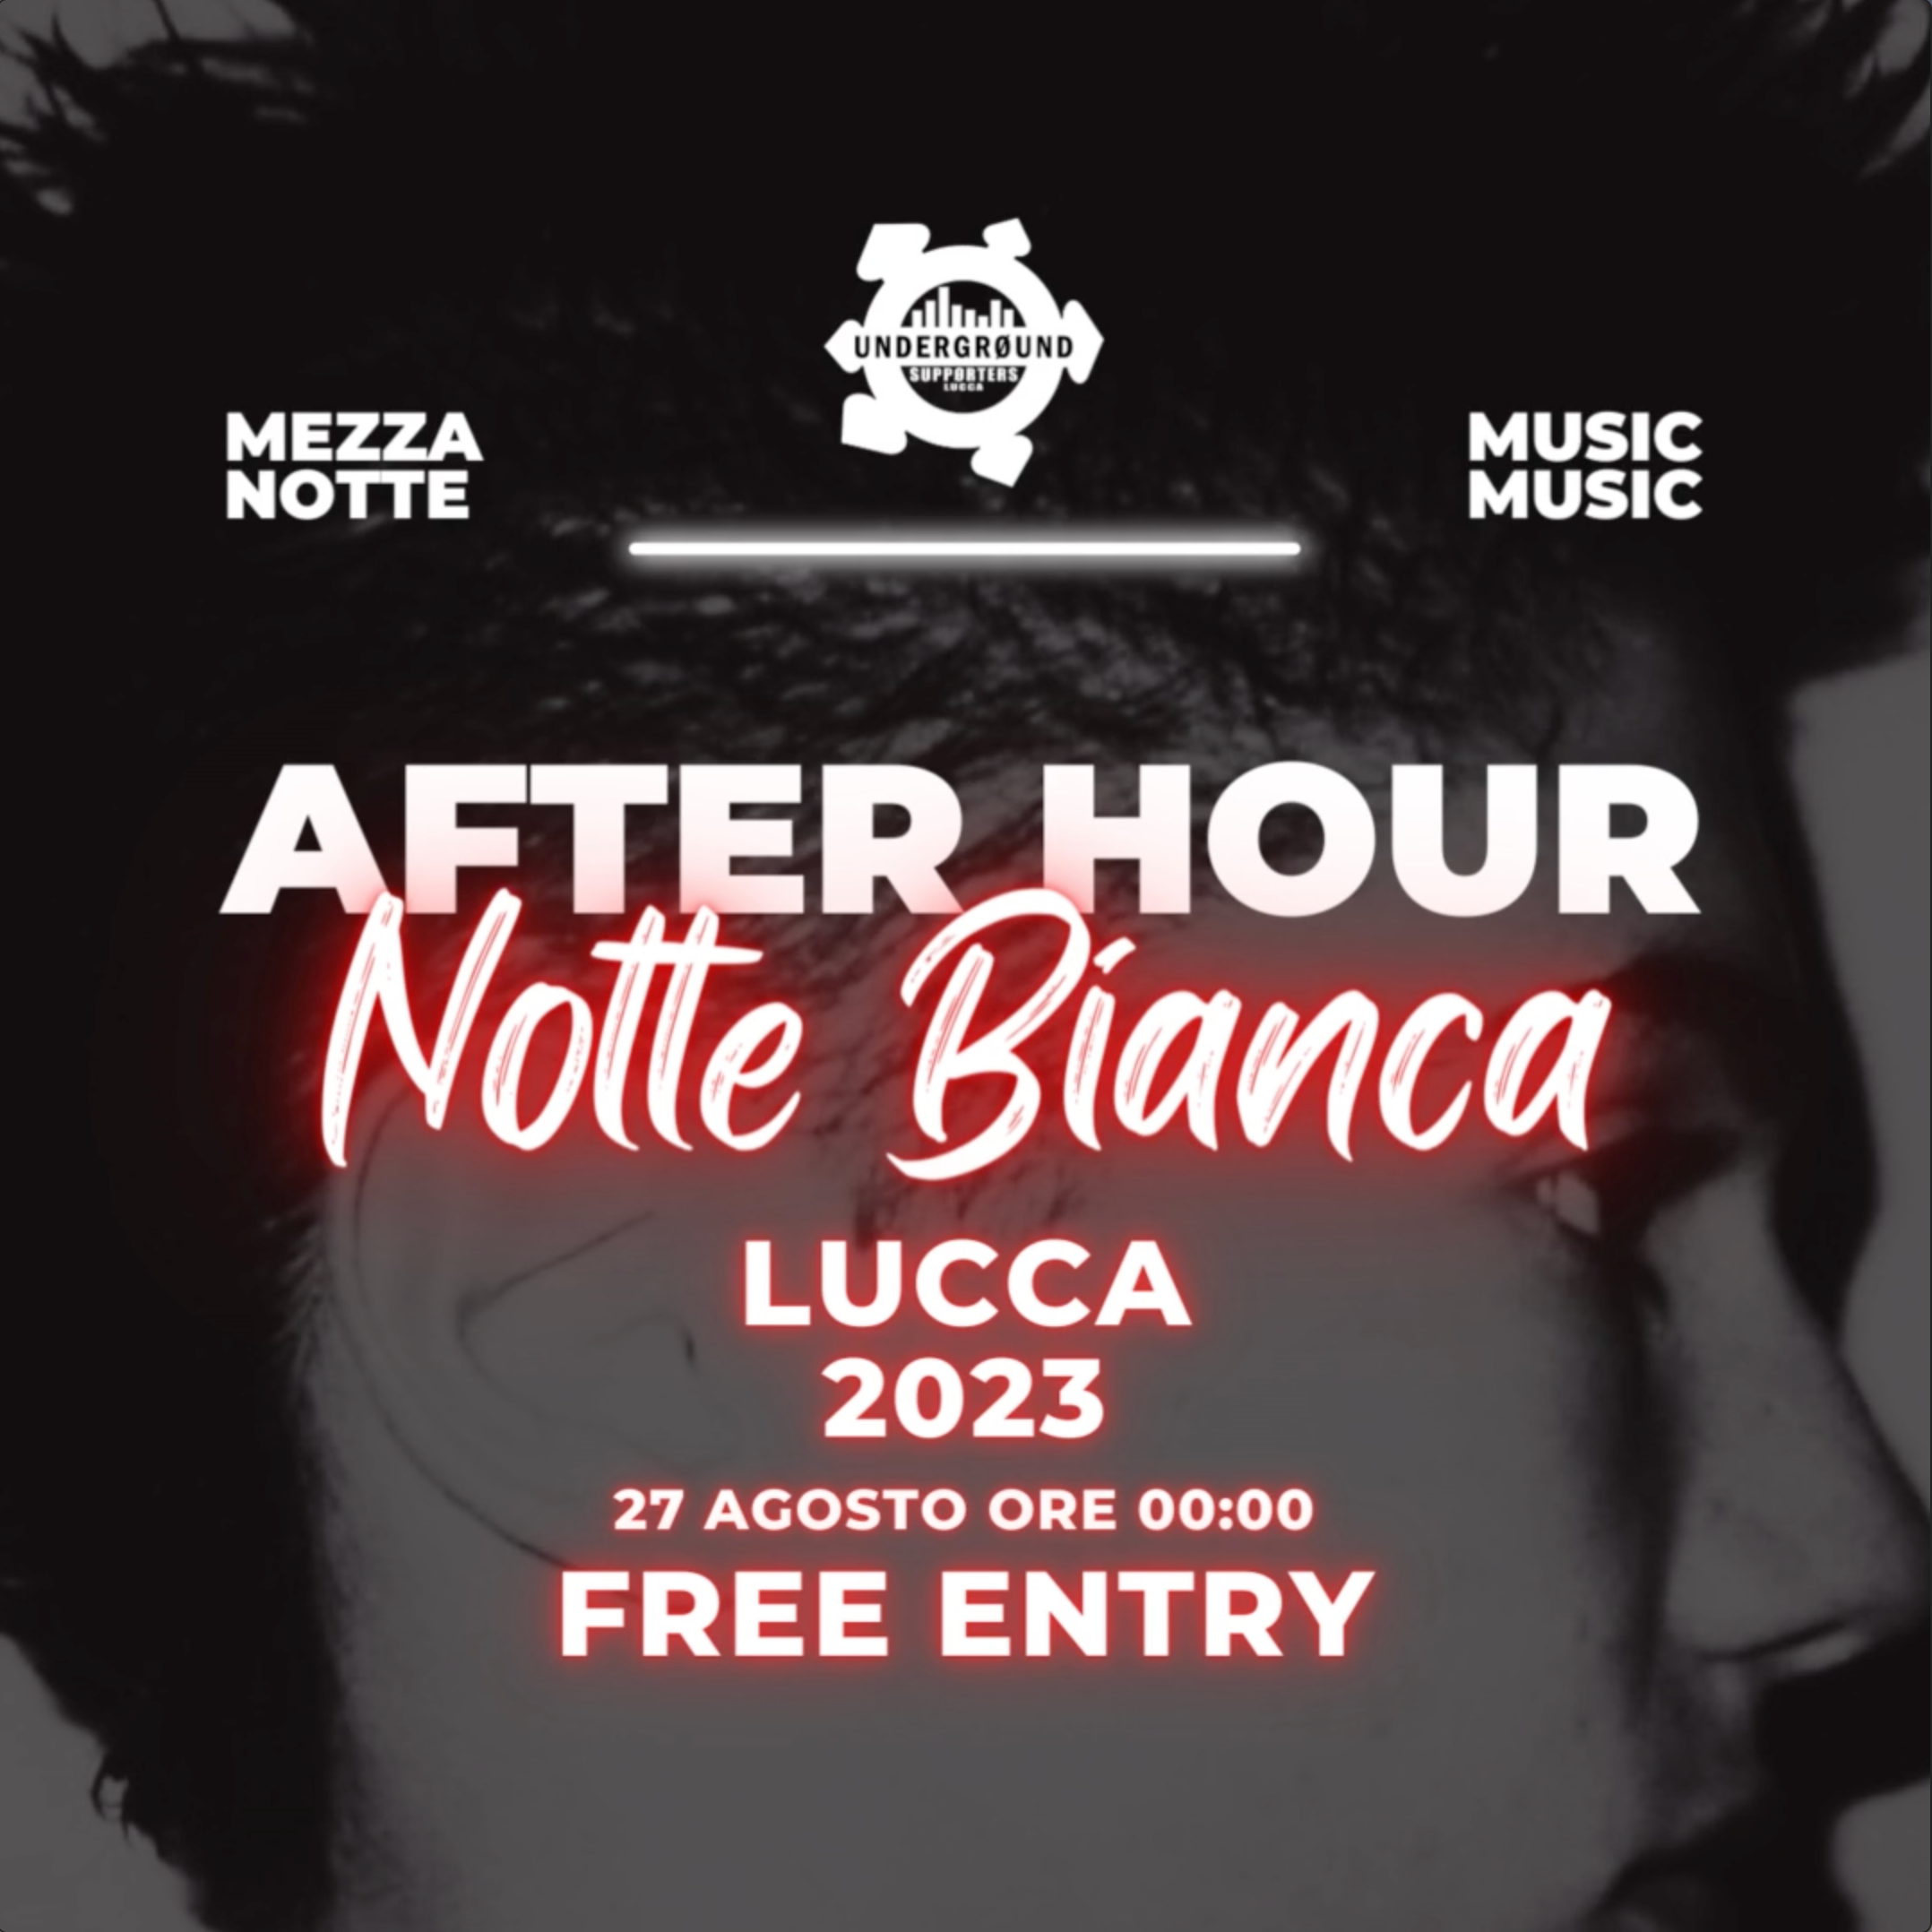 Notte bianca + AFTER - フライヤー表